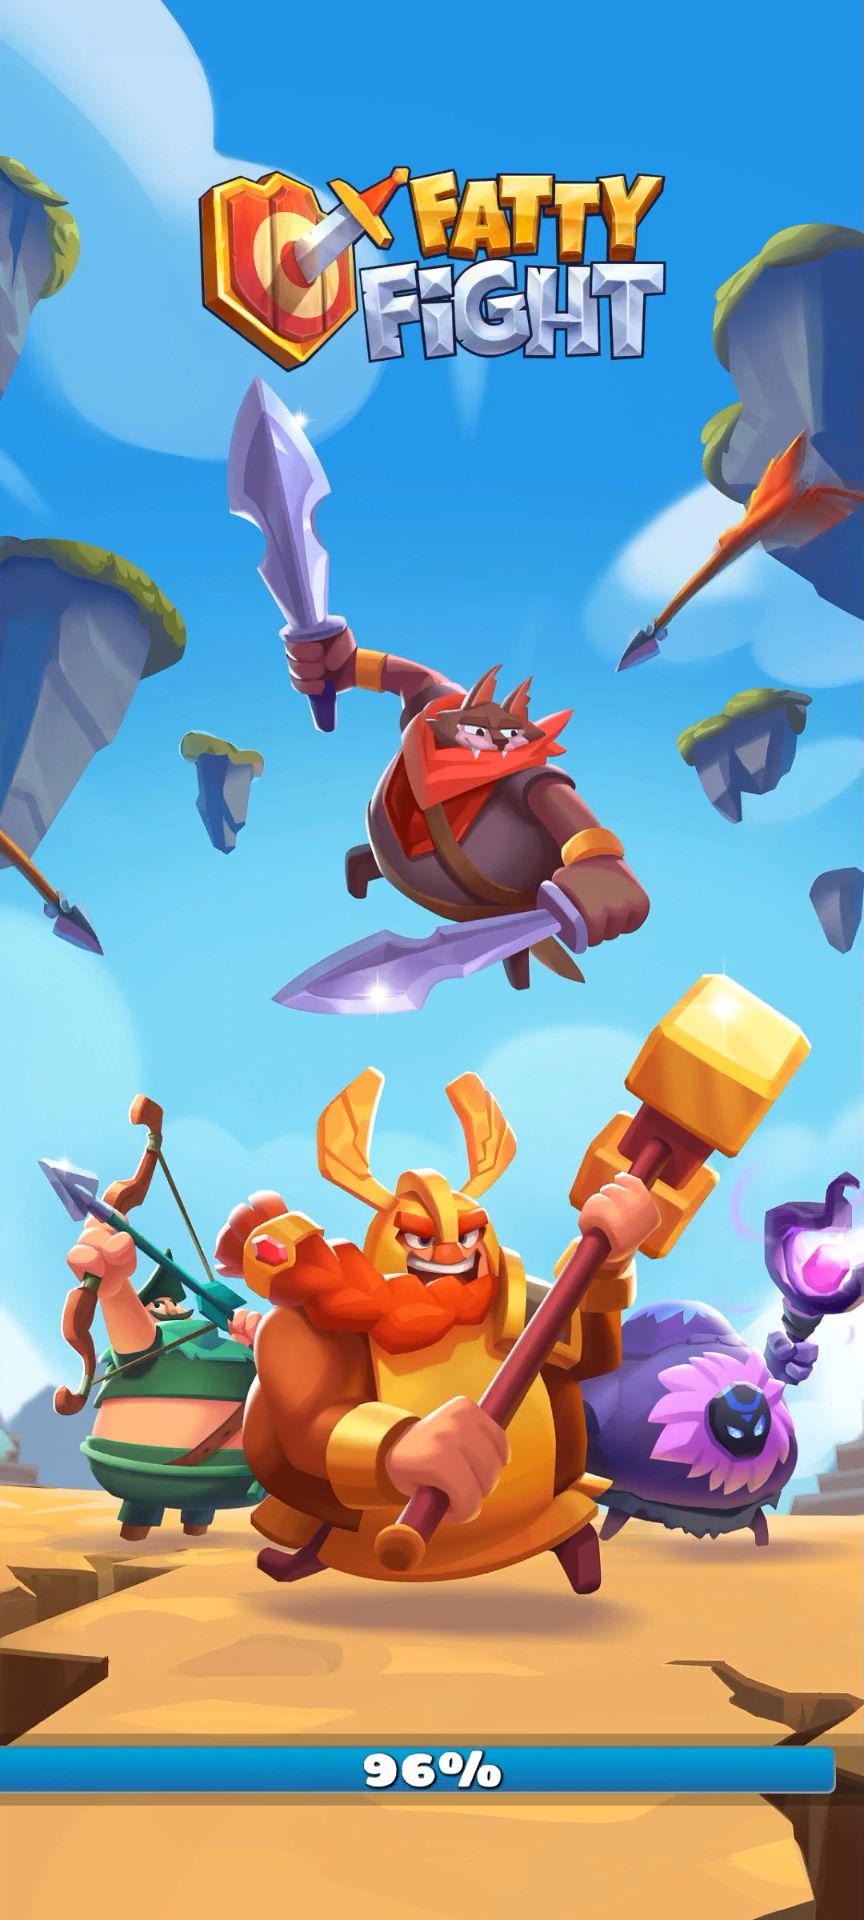 Full version of Android Match 3 game apk Fatty Fight - Match 3 Battles for tablet and phone.